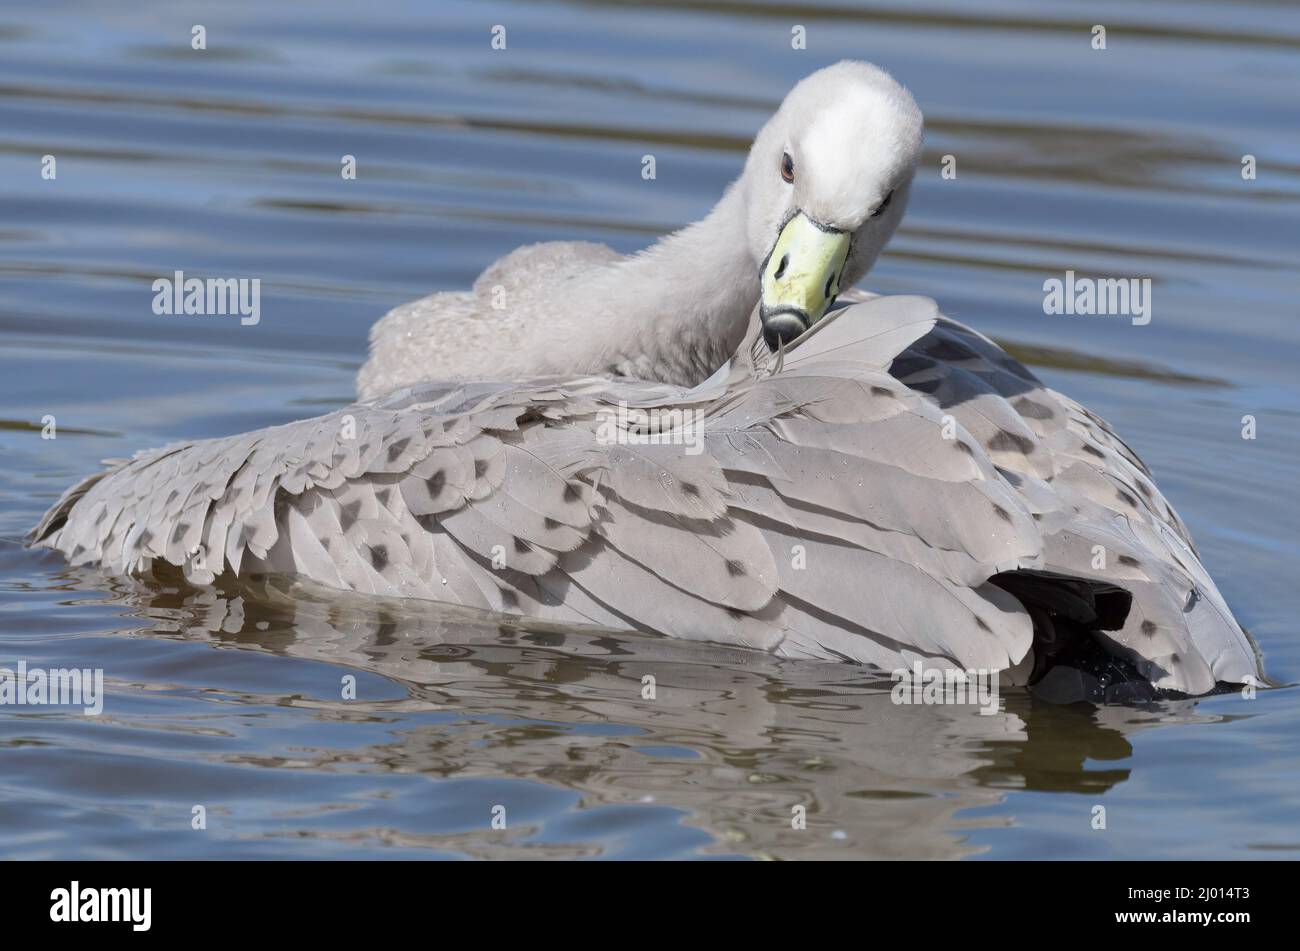 A large Cape Barren goose preening itself on the water Stock Photo